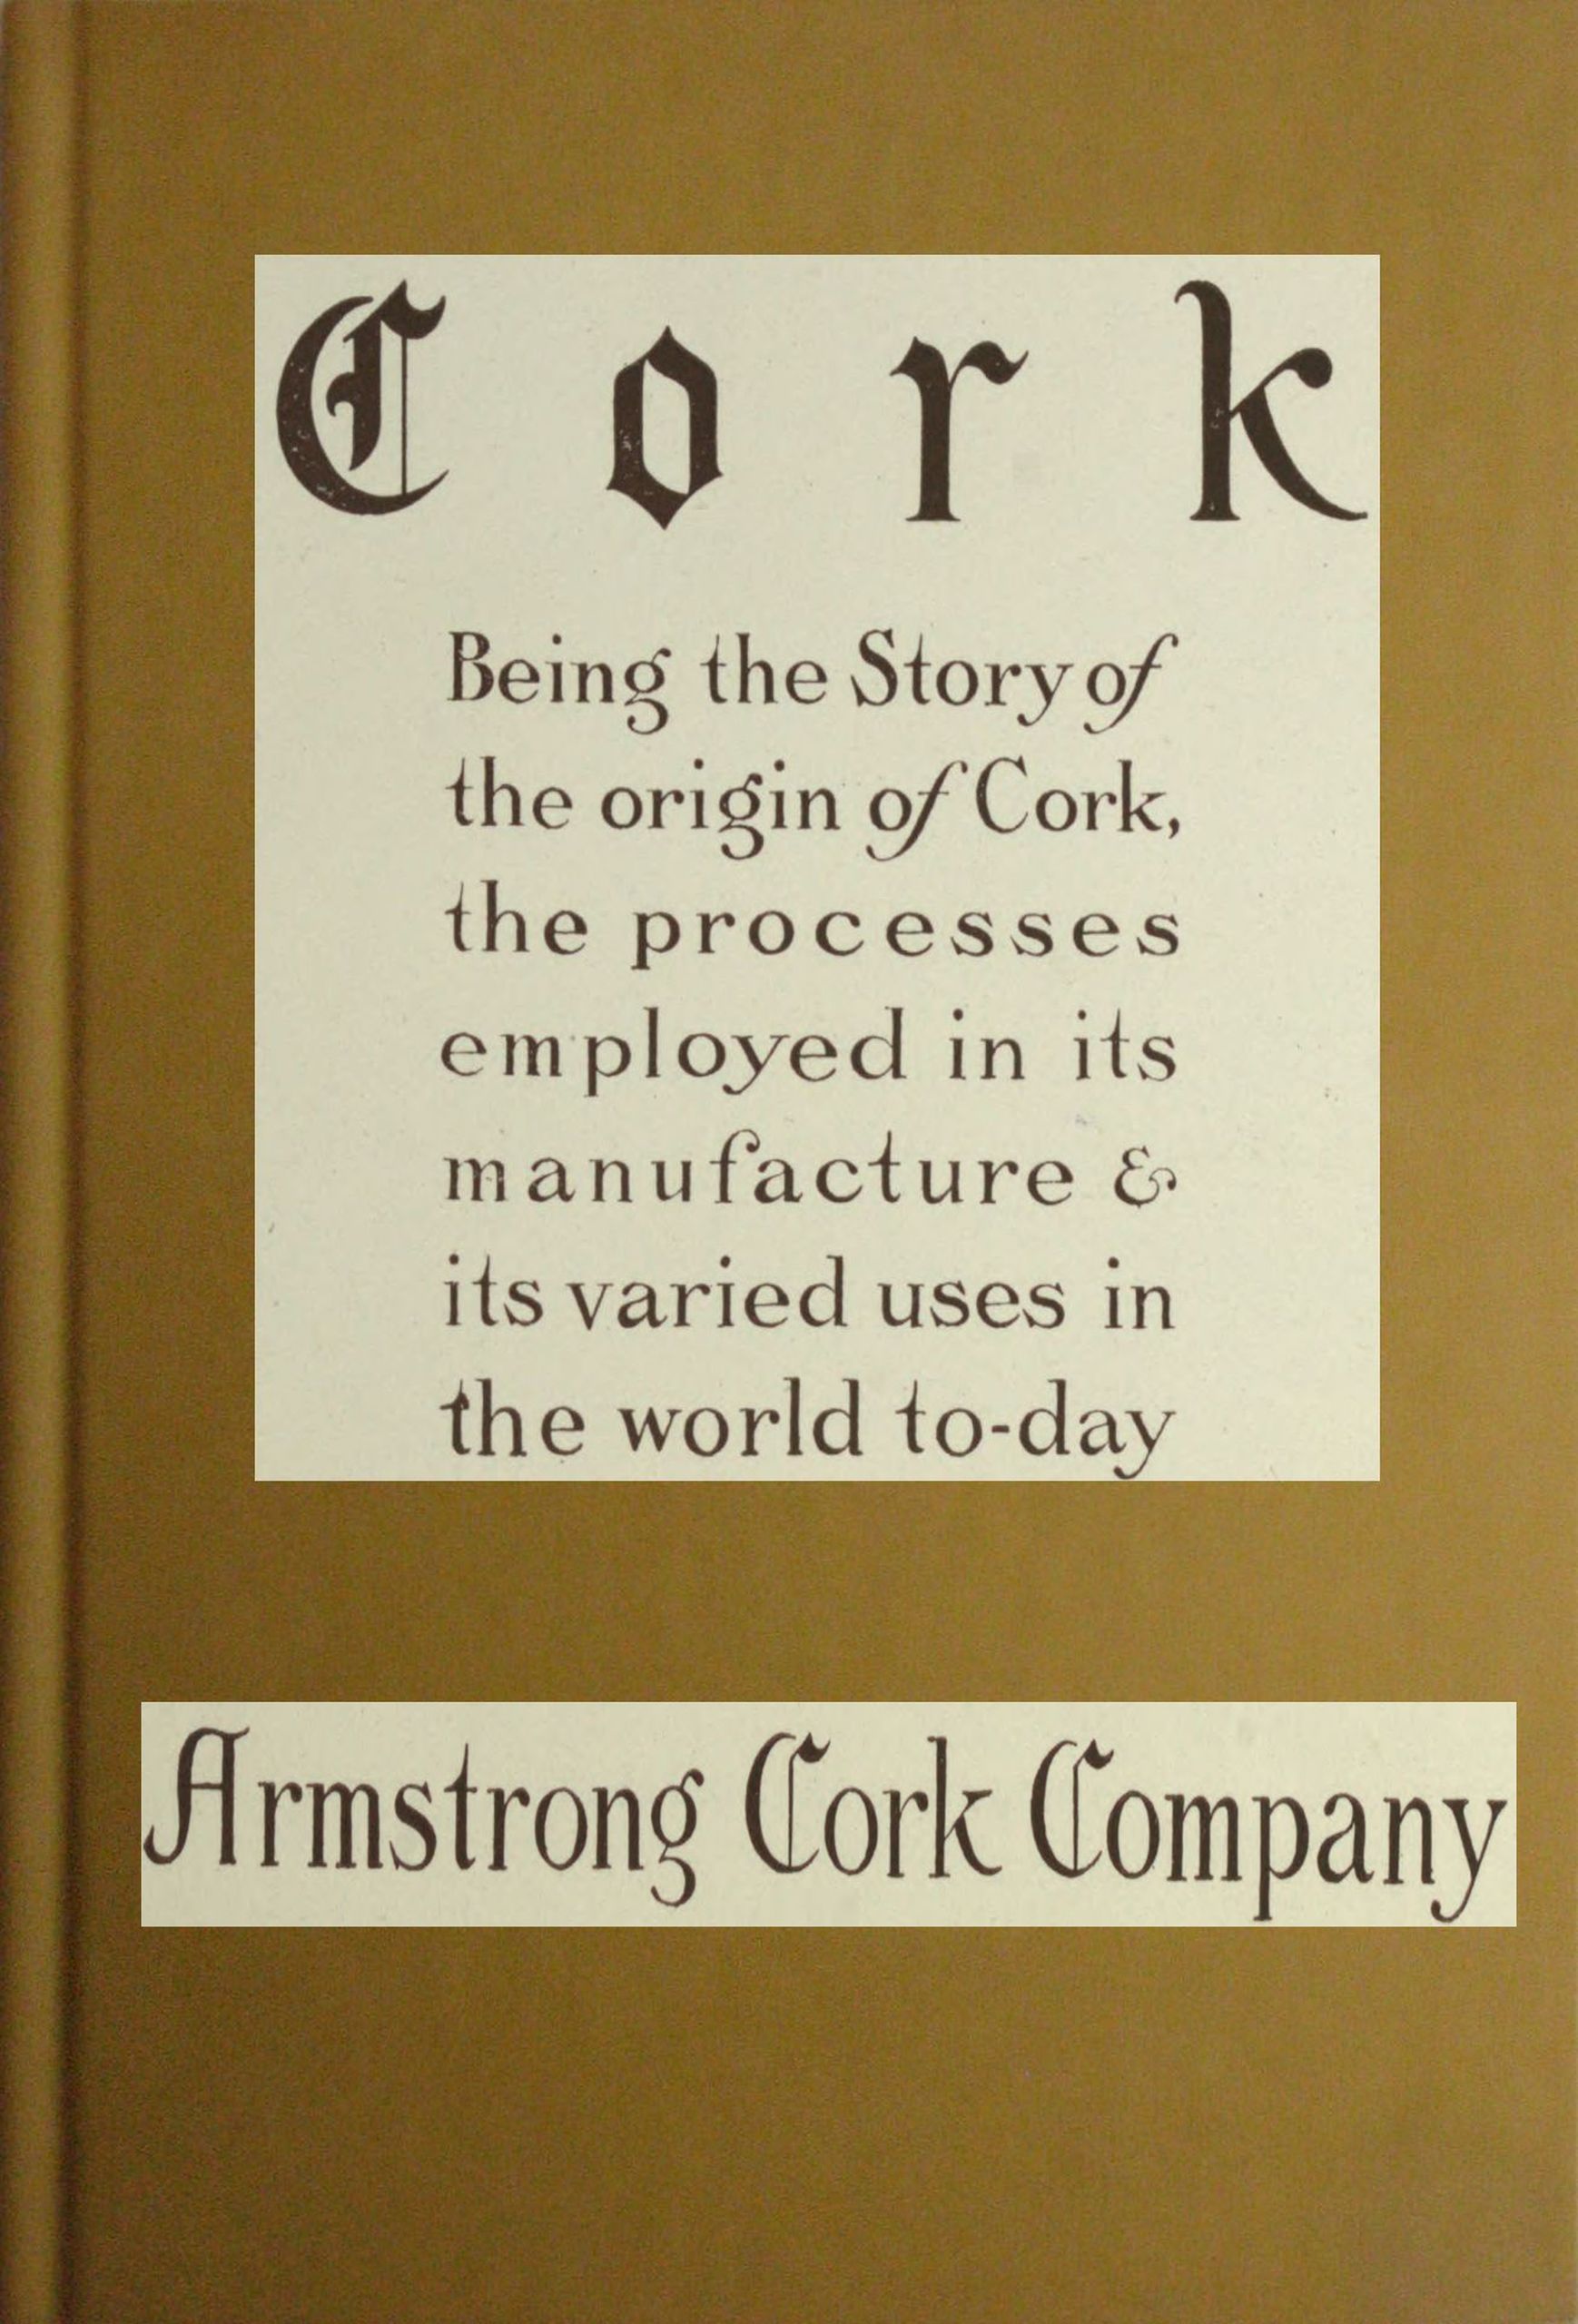 Cork: Being the story of the origin of cork, the processes employed in its manufacture & its various uses in the world to-day